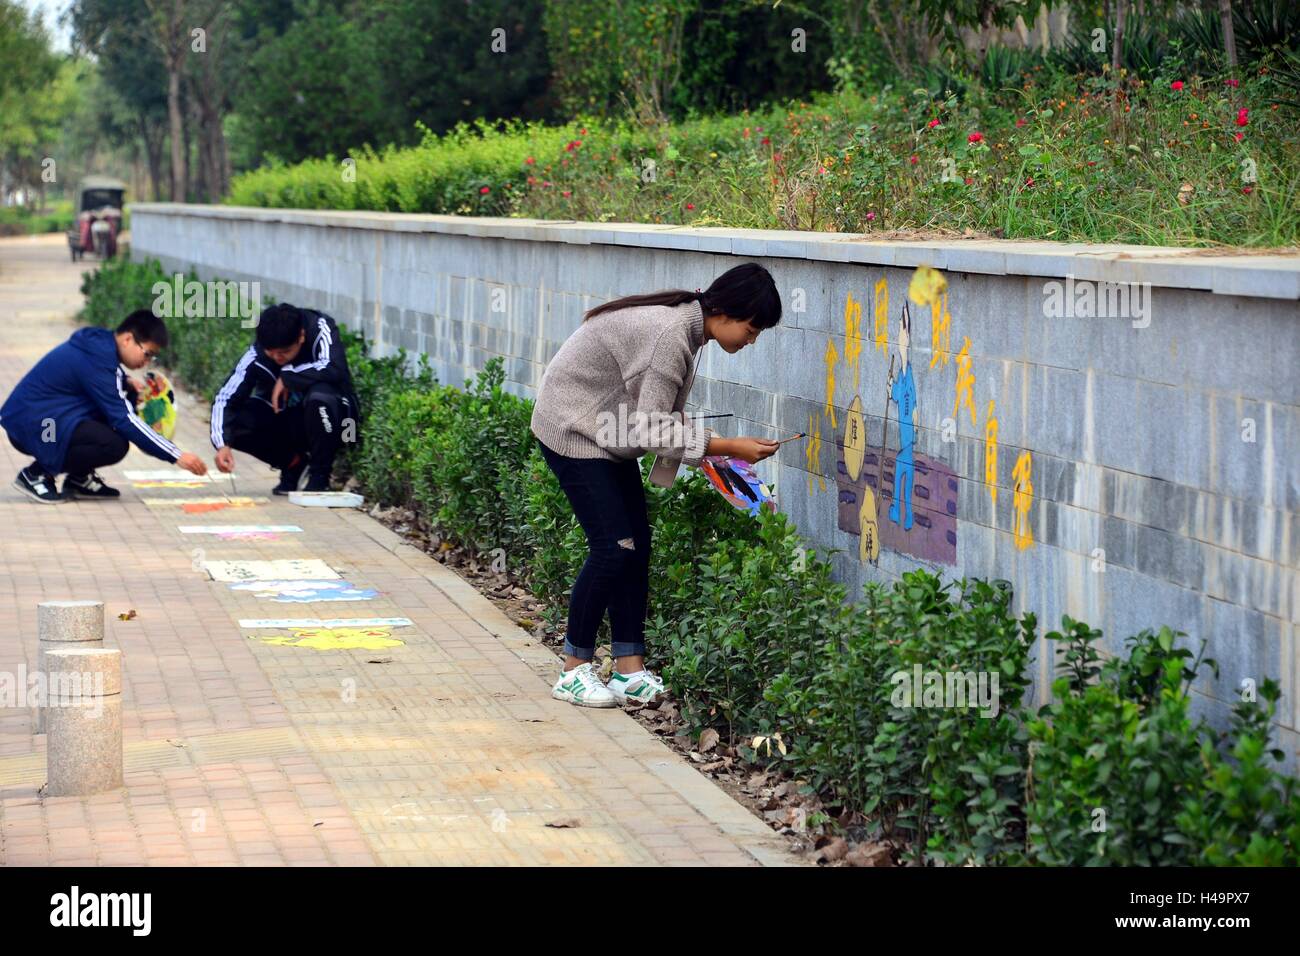 Liaocheng, Liaocheng, China. 14th Oct, 2016. Liaocheng, CHINA-October 14 2016: (EDITORIAL USE ONLY. CHINA OUT) Students from Fine Arts College of Liaocheng University draw creative cartoon characters including Garfield Cat and Doraemon on blind sidewalk in Liaocheng, east ChinaÂ¡Â¯s Shandong Province, on October 14th, 2016, marking the upcoming White Cane Safety Day and appealing the public to care for visually impaired people. The White Cane Safety Day, celebrated on October 15 of each year since 1964, is set aside to celebrate the achievements of people who are blind or visually impaired an Stock Photo